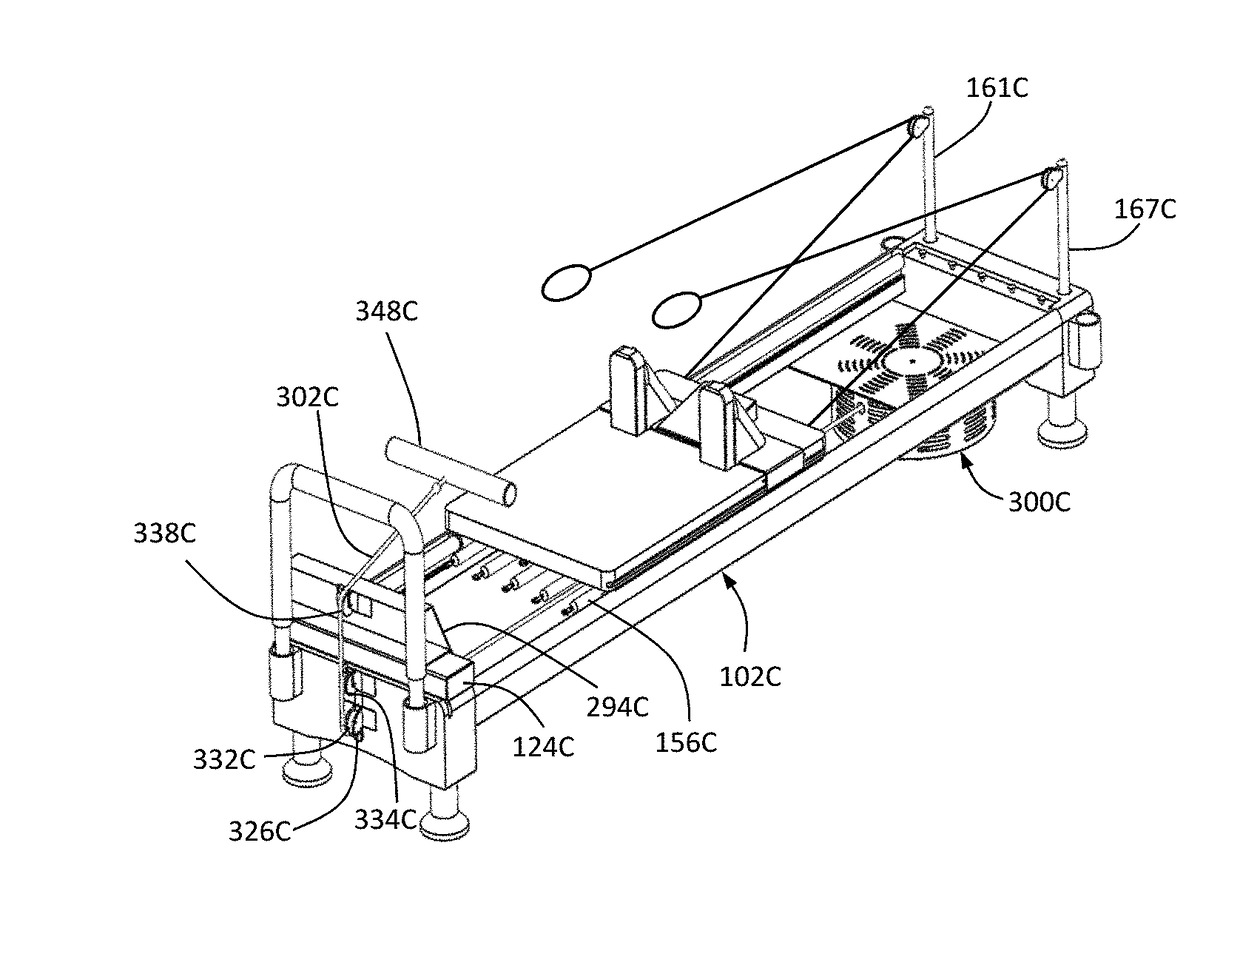 Translating carriage exercise machines and methods of use